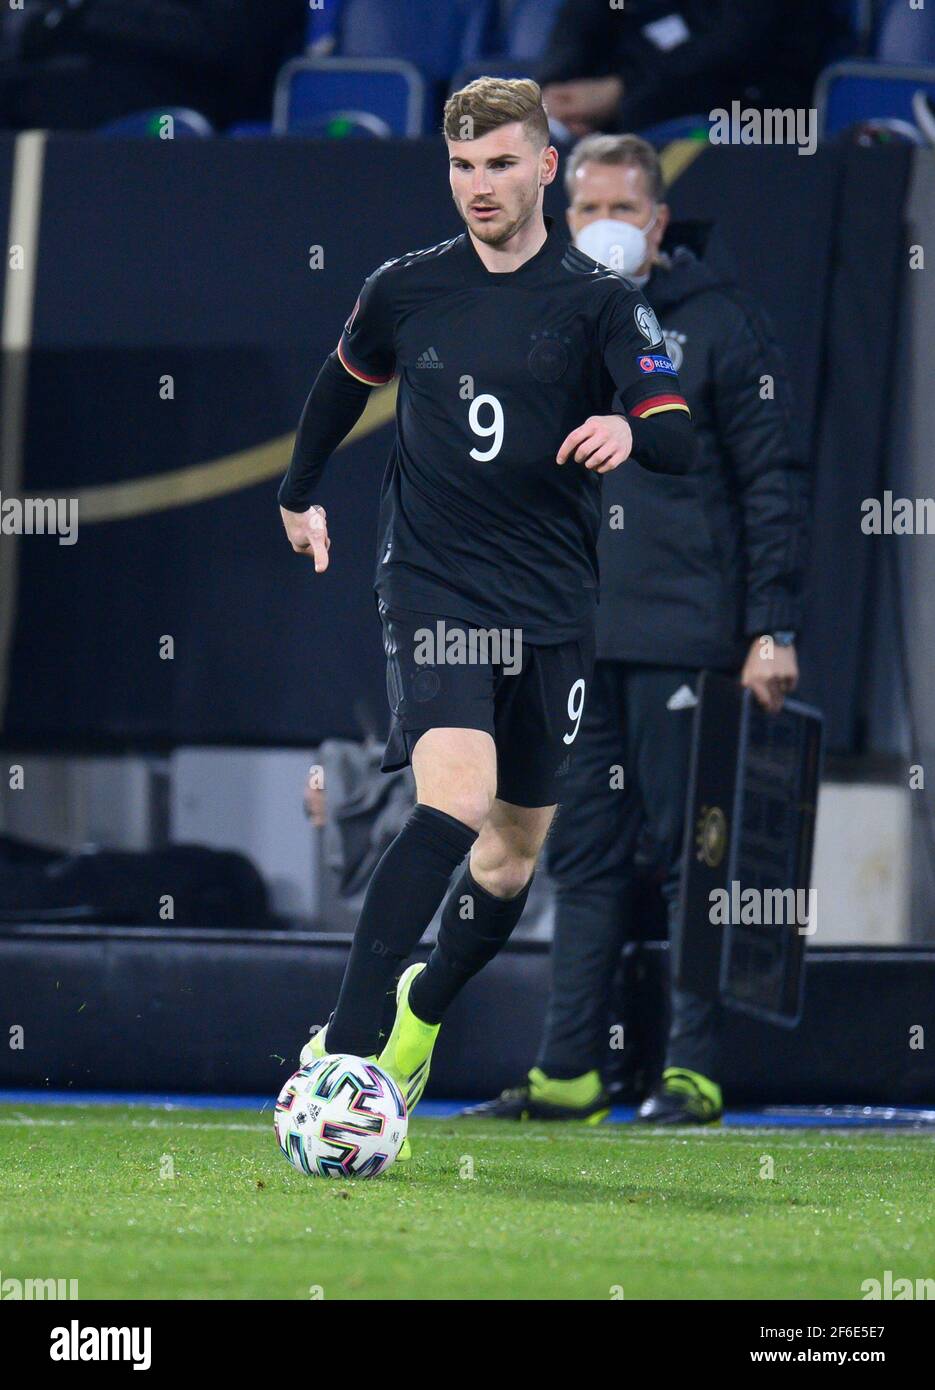 Duisburg, Deutschland. 25th Mar, 2021. Single action, cut-out Timo Werner.  GES/Fussball/WM-Qualifikation: Germany - Iceland, 25.03.2021 Football/Soccer:  World Cup qualifying match: Germany vs. Iceland, Duisburg, Germany, March  25, 2021 | usage ...